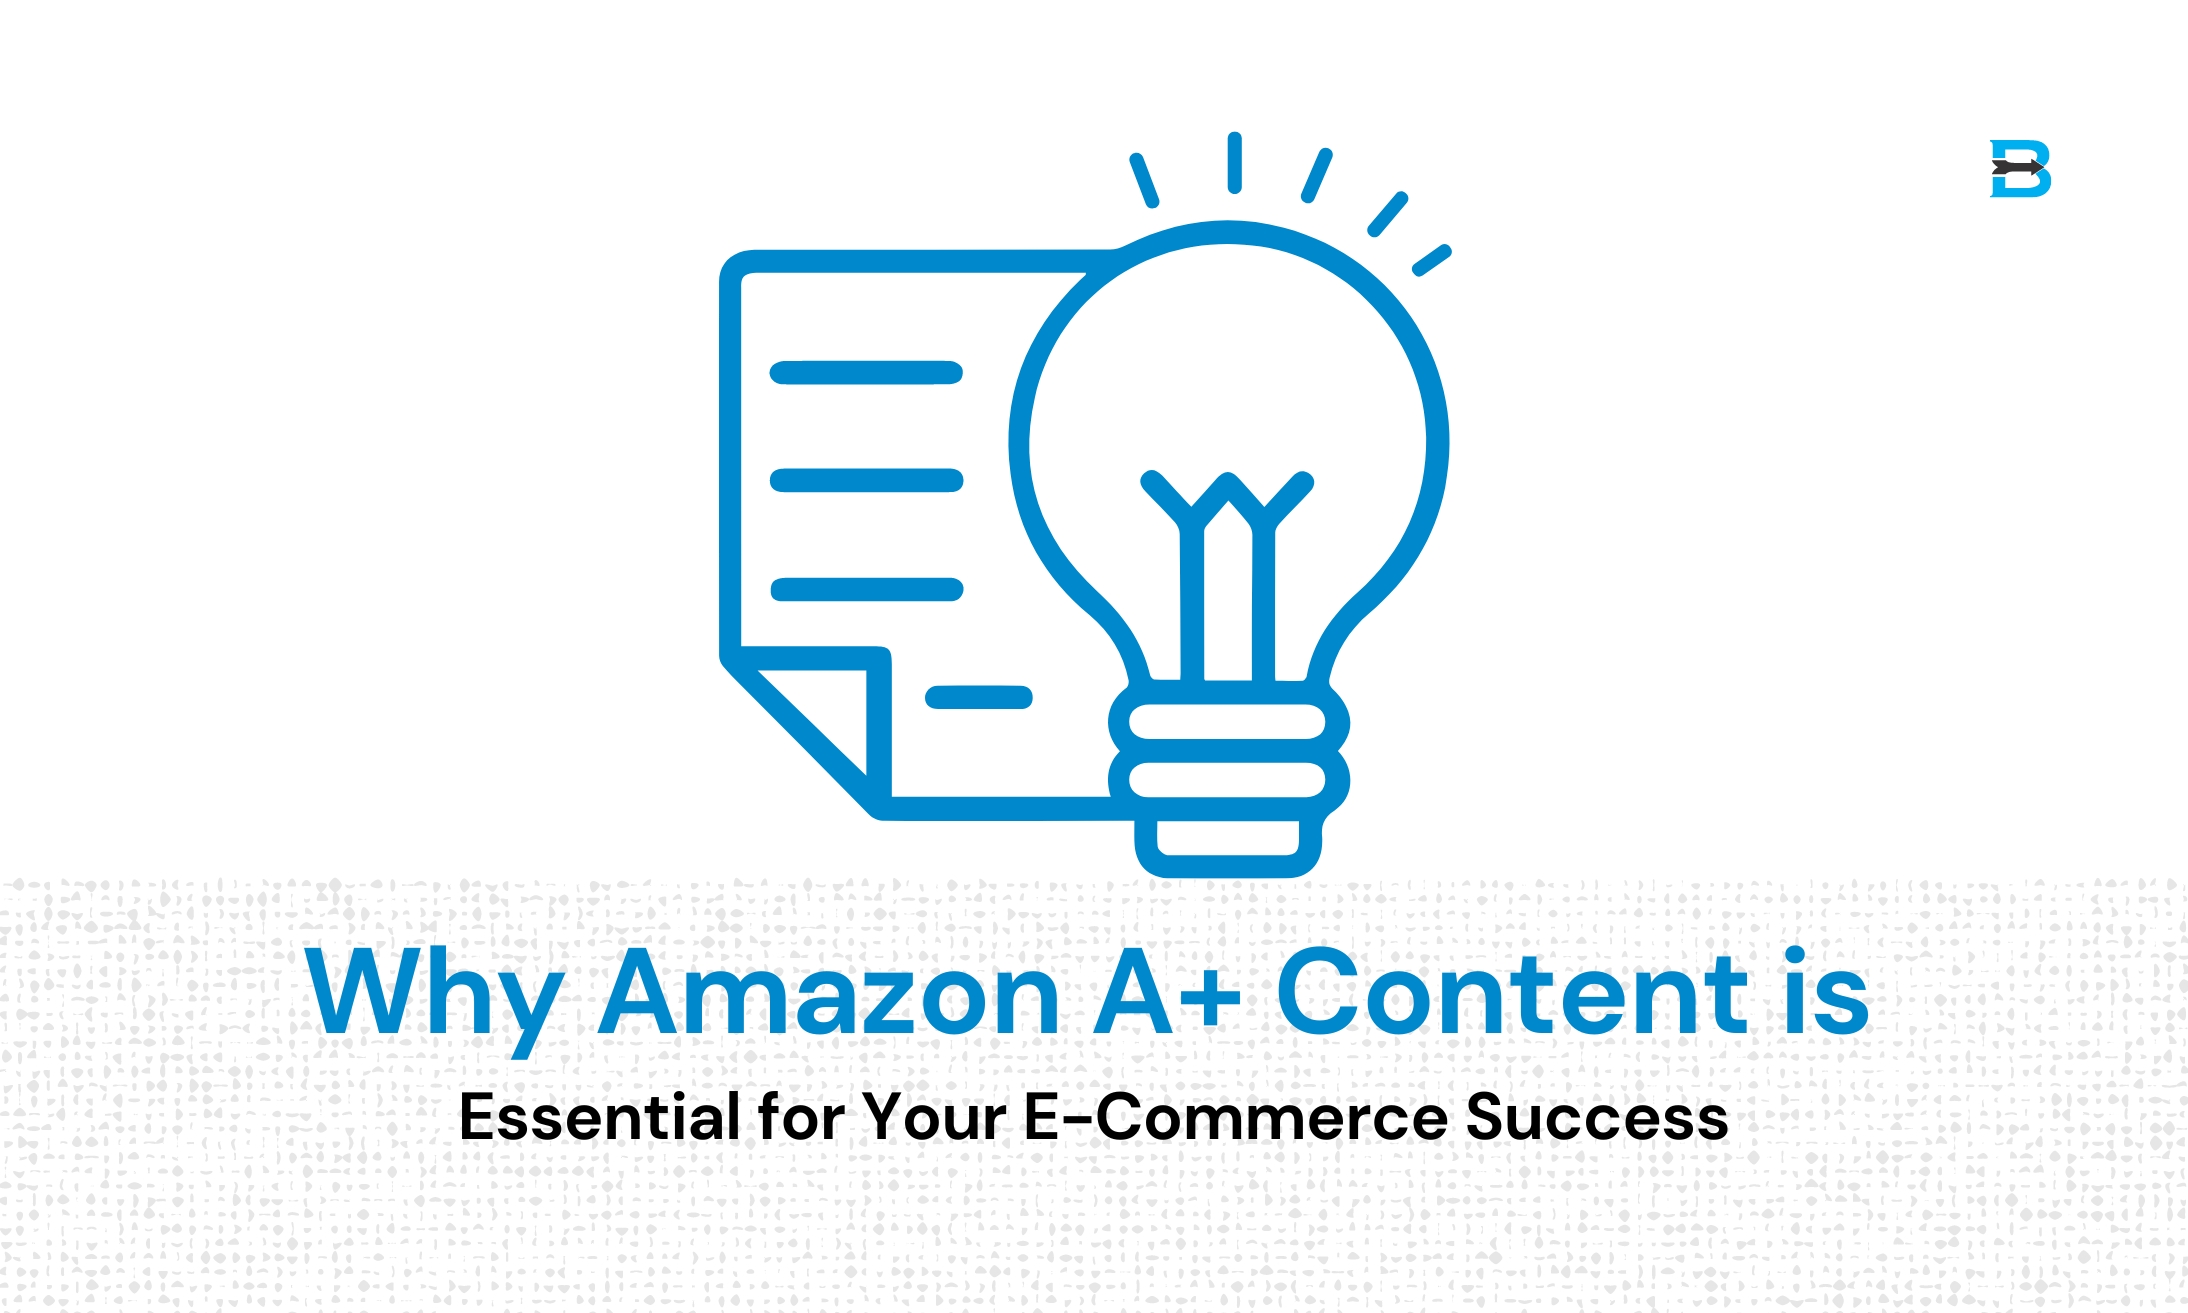 Why Amazon A+ Content is Essential for Your E-Commerce Success